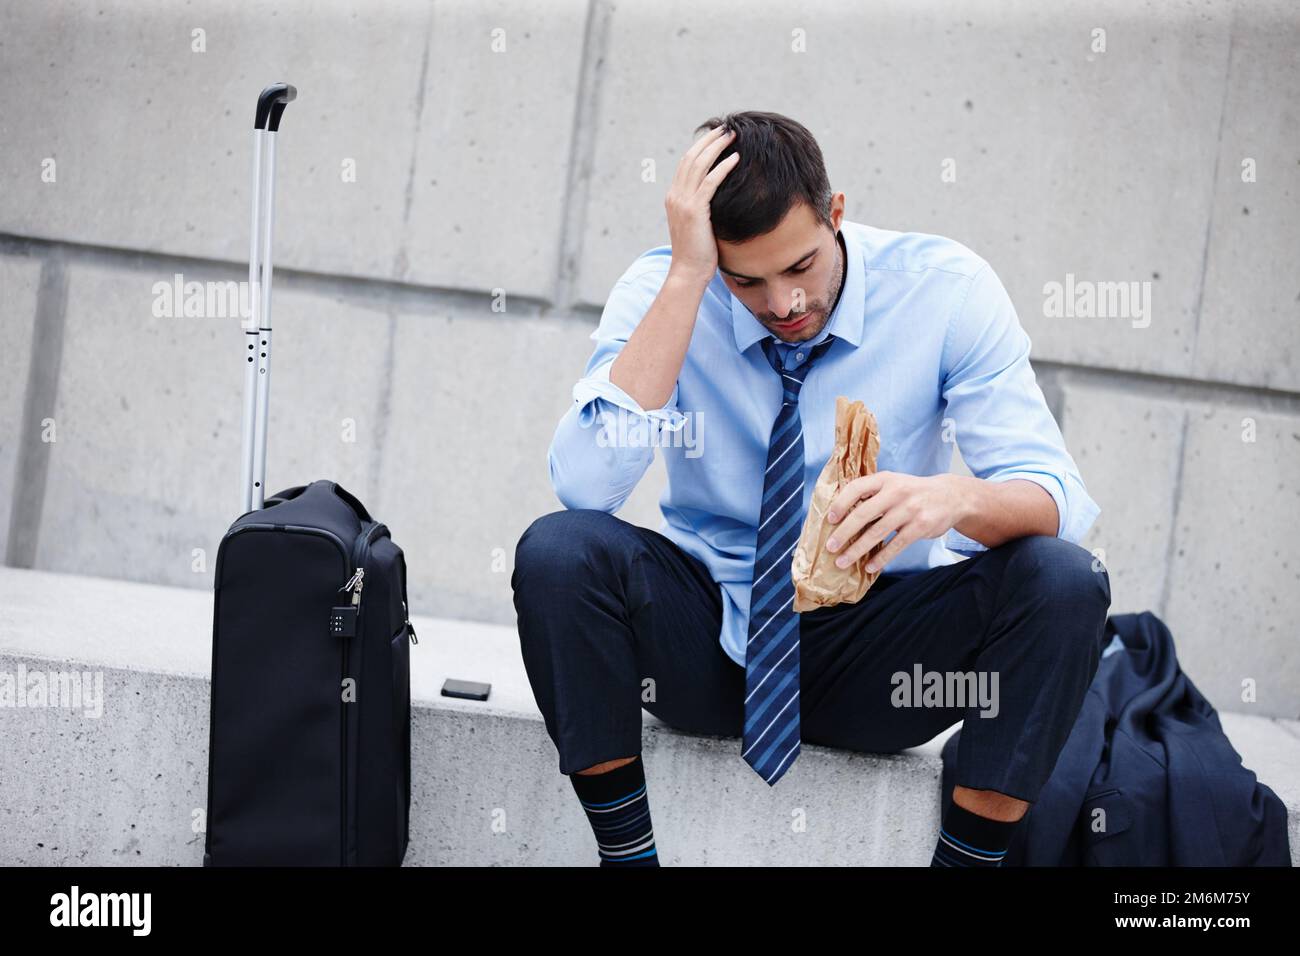 Struggling with retrenchment. A young businessman sitting outdoors and drinking while looking dejected. Stock Photo